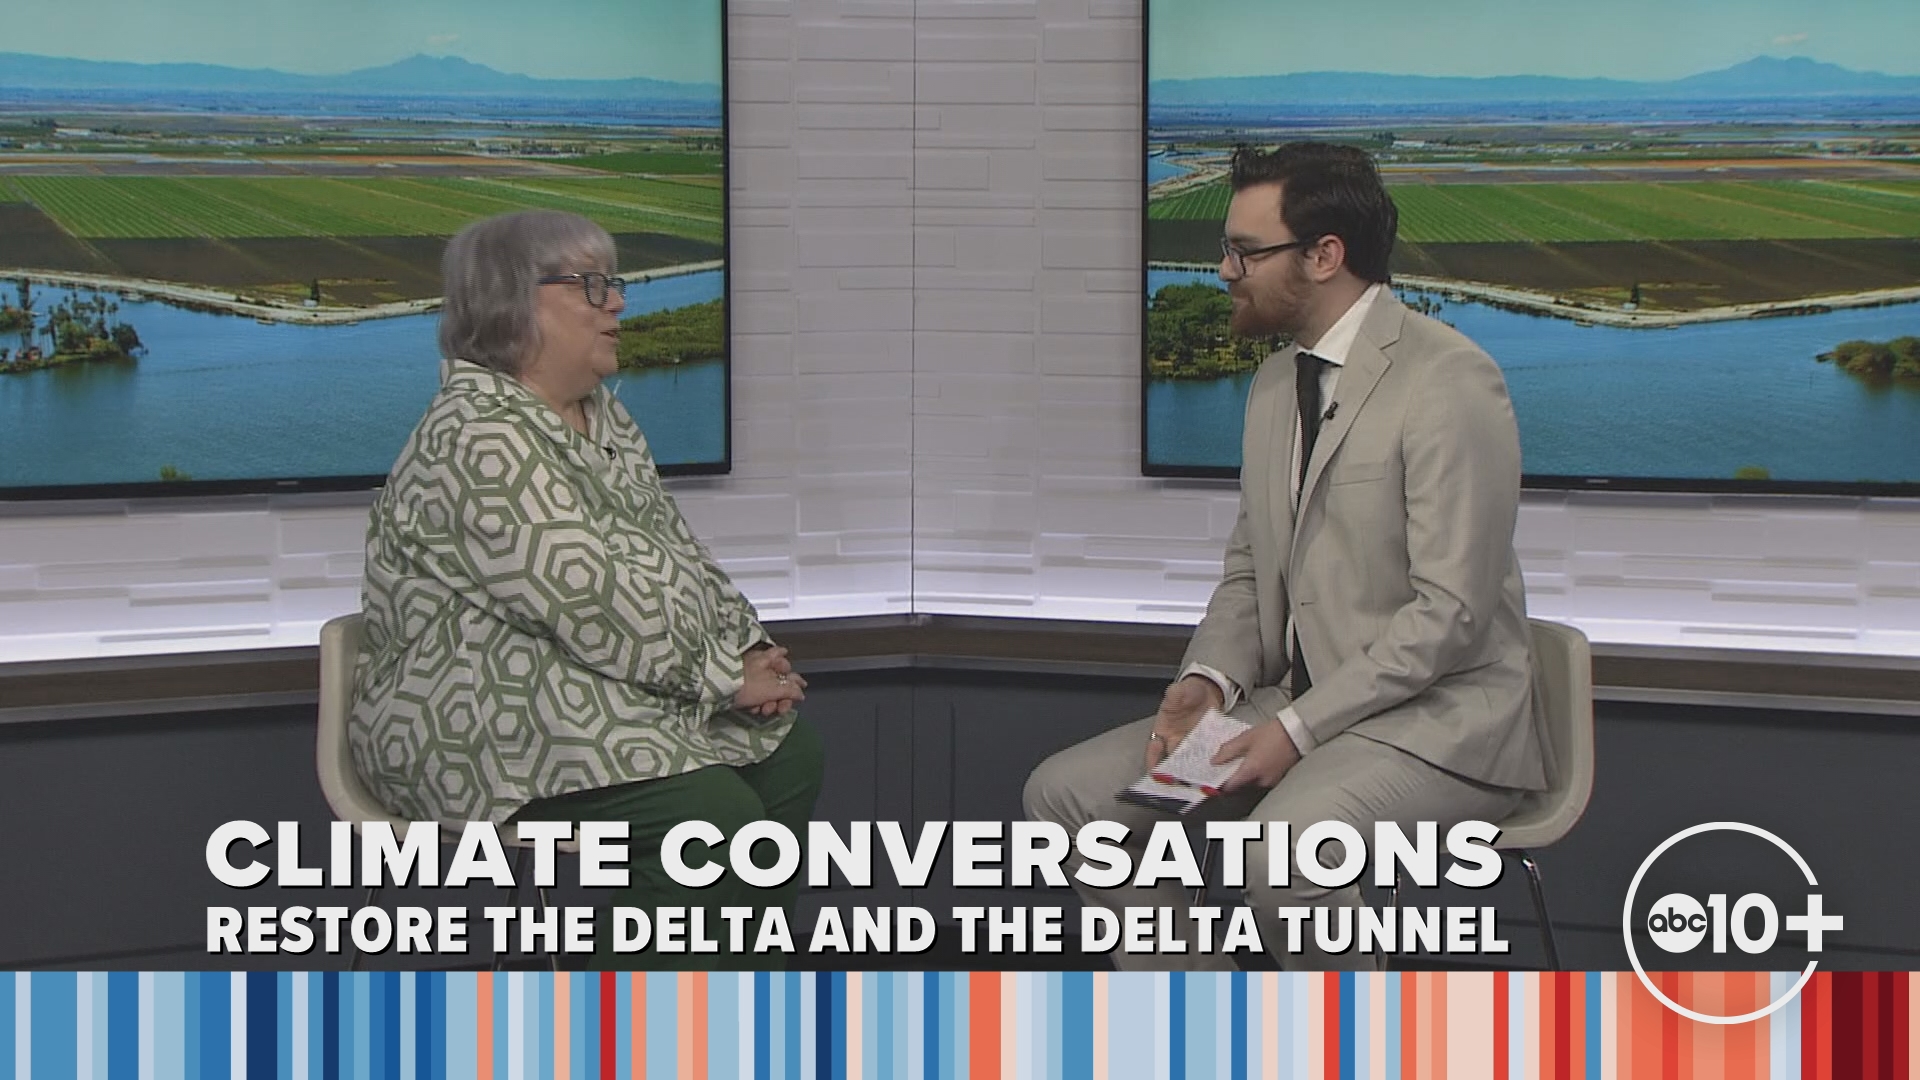 Barbara Barrigan-Parrilla has been working to protect the Delta for decades. She sat down with ABC10 to talk about the current challenges and the Delta Tunnel.